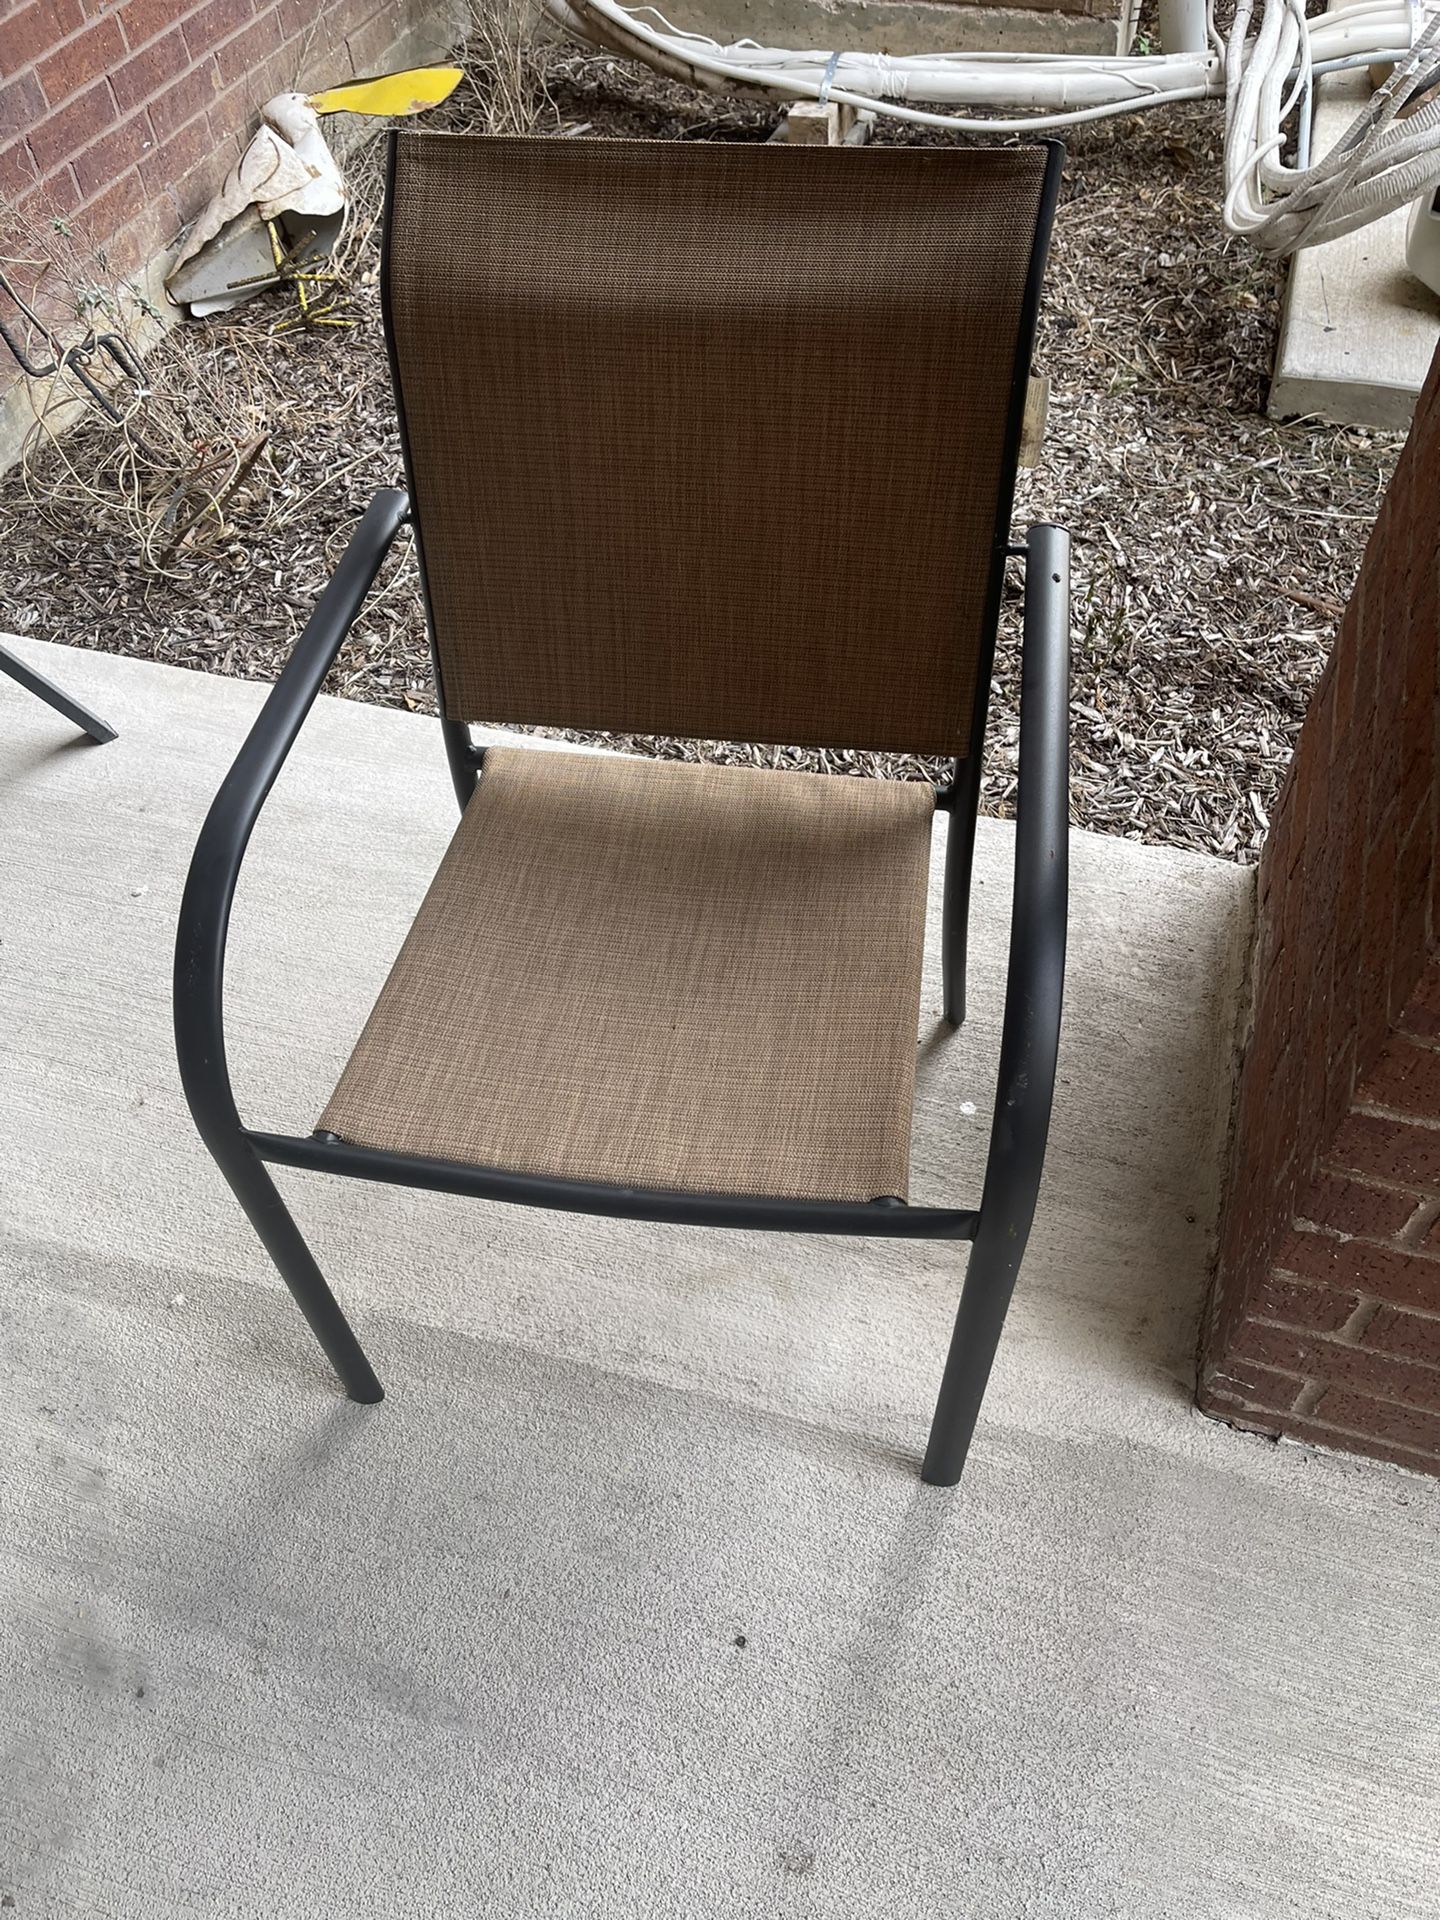 Chairs - Like New - 3 Available - $10 Each Or All 3 For $25